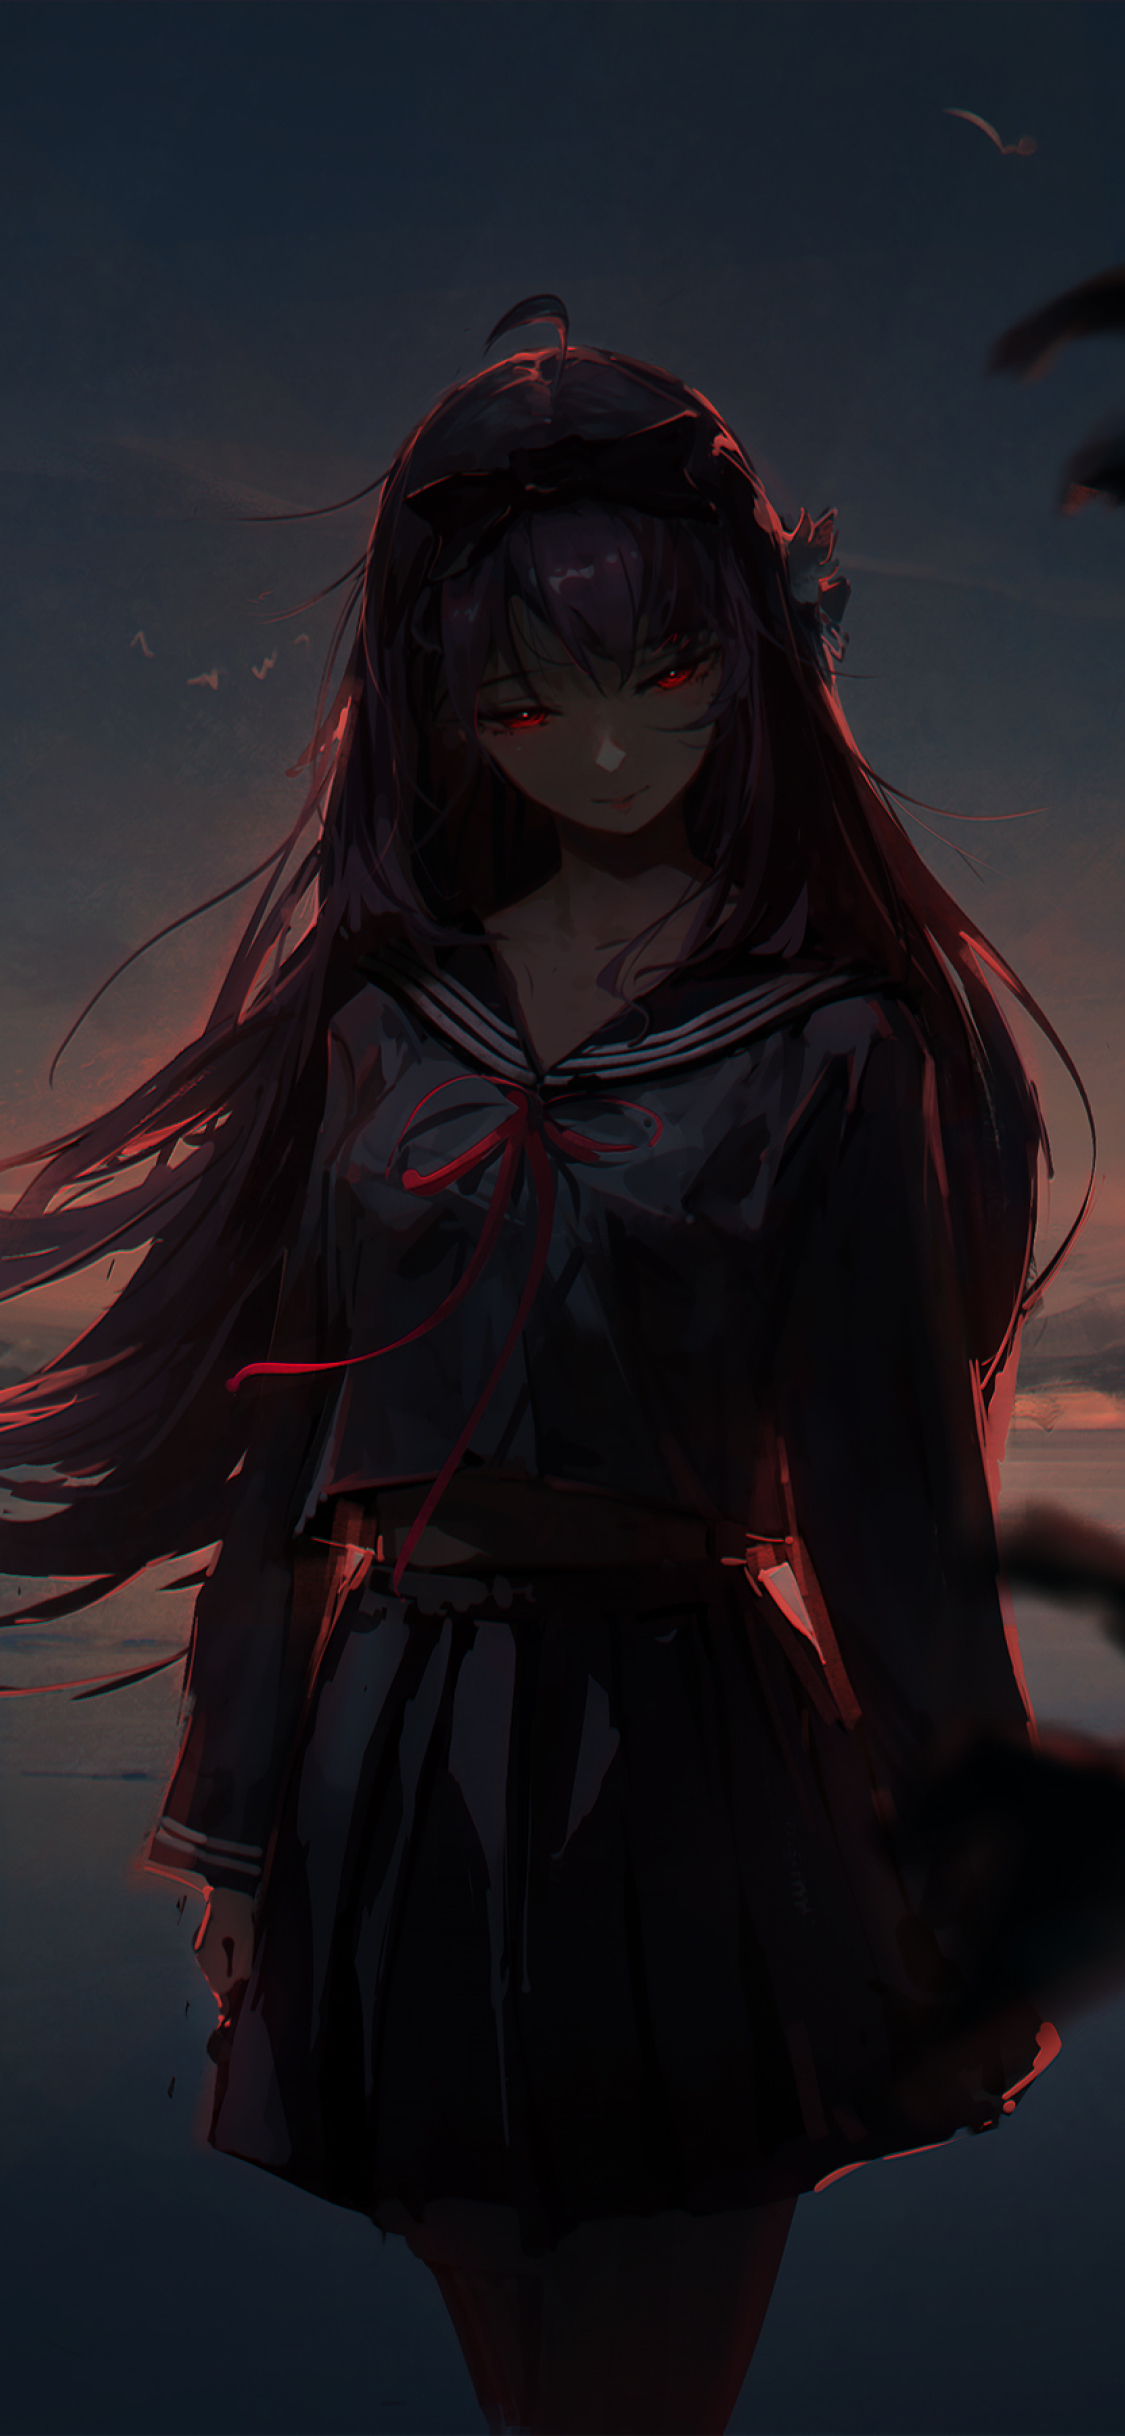 Discover 164+ badass anime backgrounds latest - in.eteachers